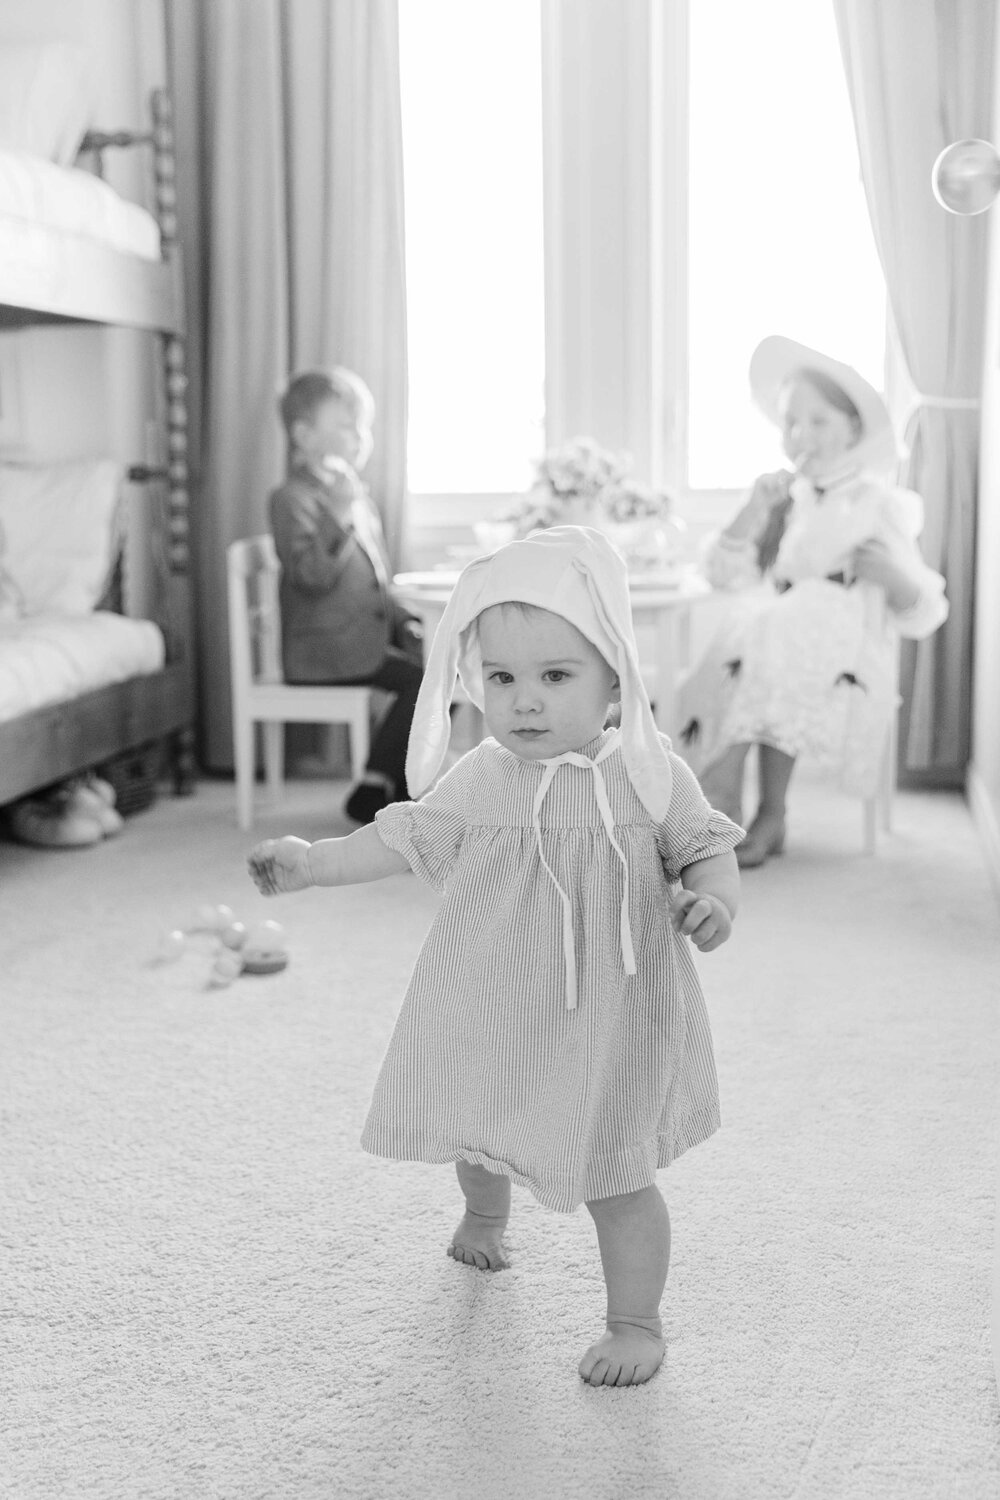 How to Connect with children, mother's connection, easter tea party, calgary motherhood photographer jennie guenard photography